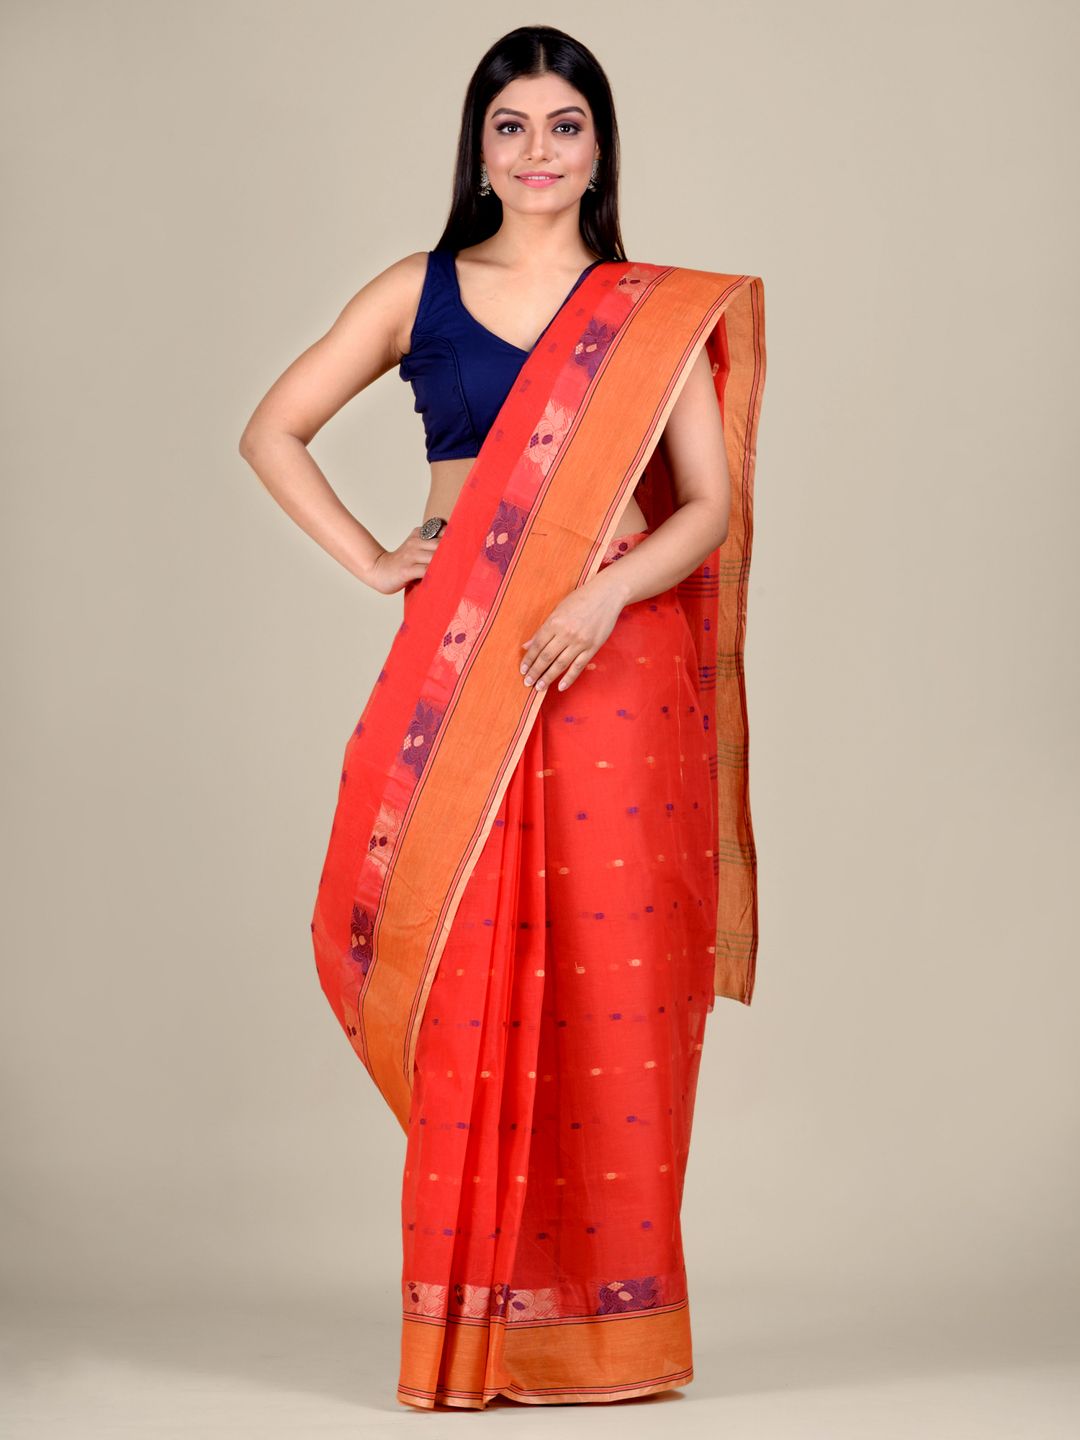 Women's Red Cotton Hand Woven Tant Saree With Orange Border Without Blouse-Sajasajo